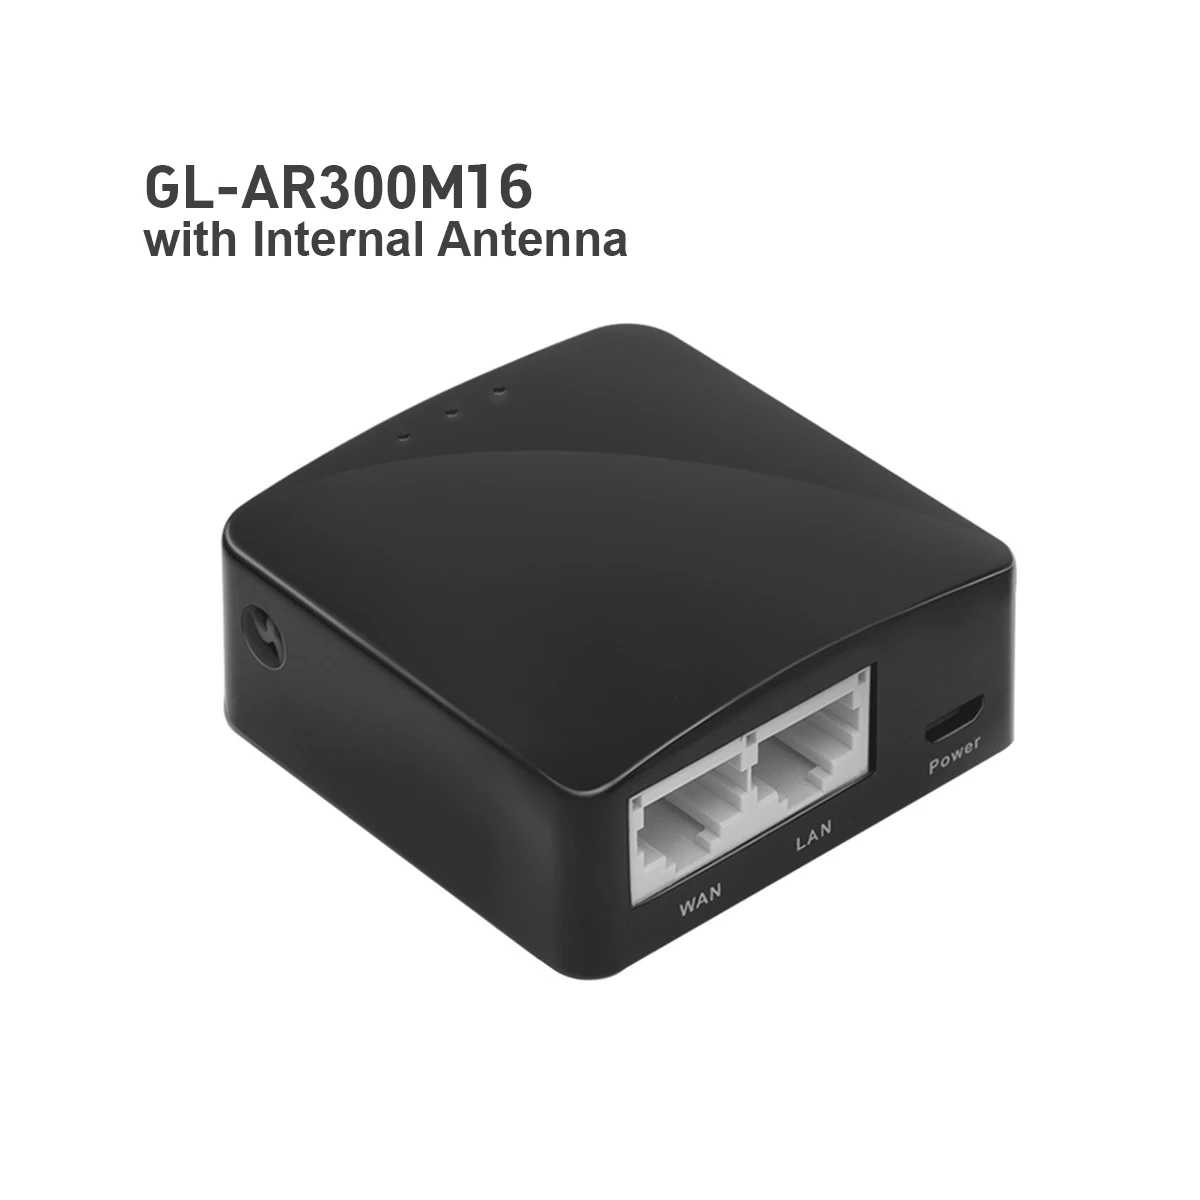 GL.iNet GL-AR300M16 Mini Router, Wi-Fi Repeater, OpenWrt Pre-Installed, 300Mbps High Performance, 16MB Nor Flash,128MB RAM enlarge